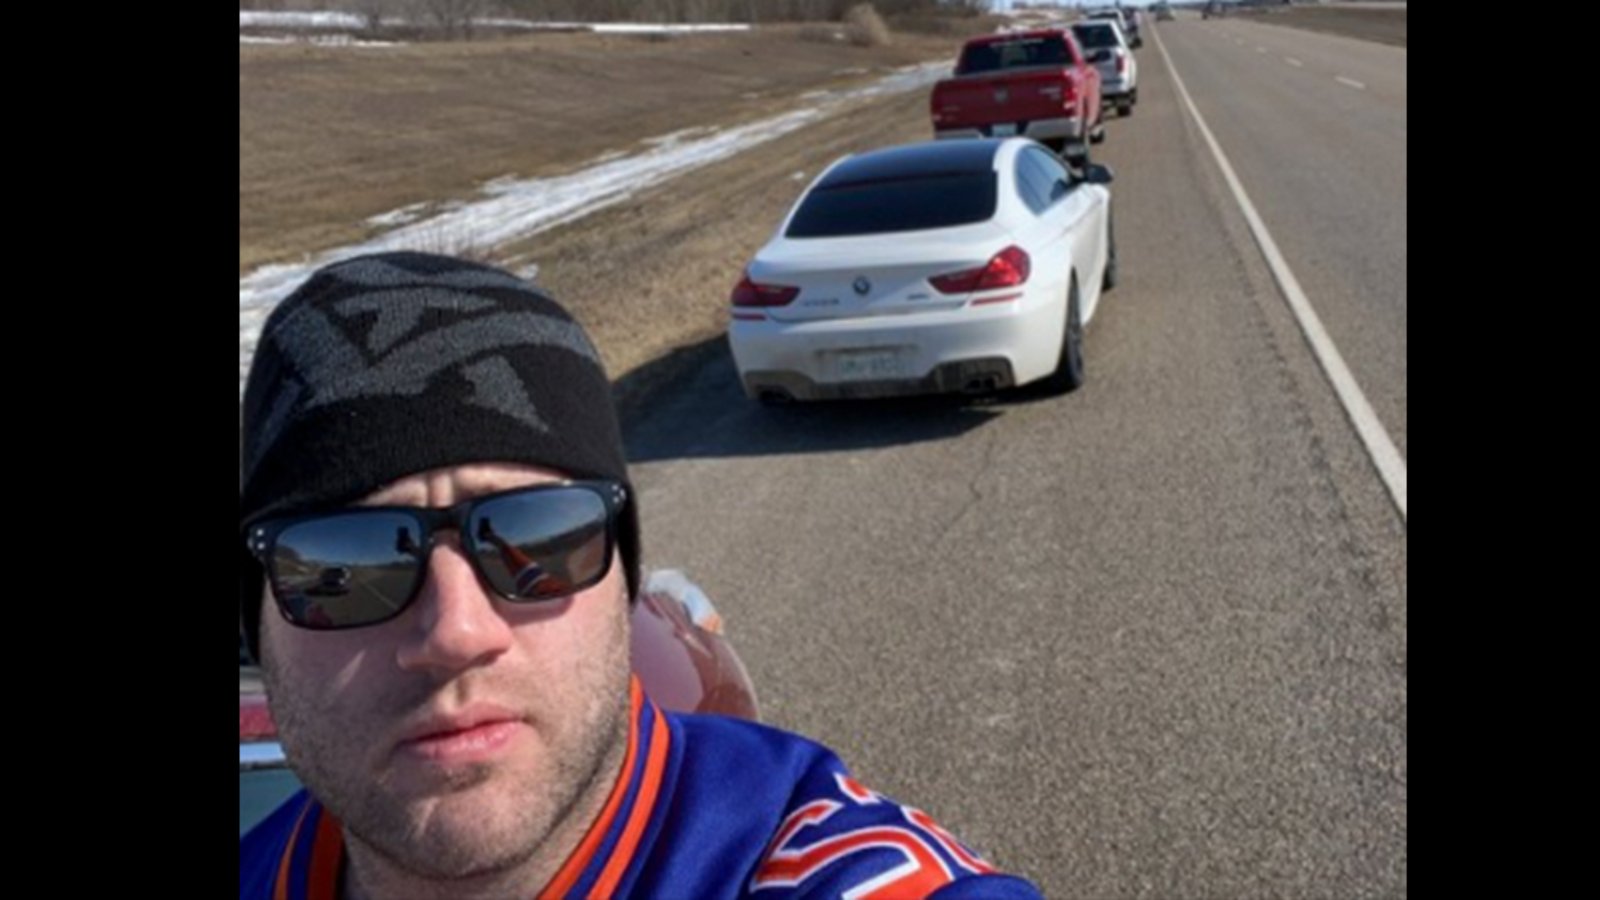 Former NHLer Eric Gryba shares touching photos from vehicle parade tribute to Colby Cave